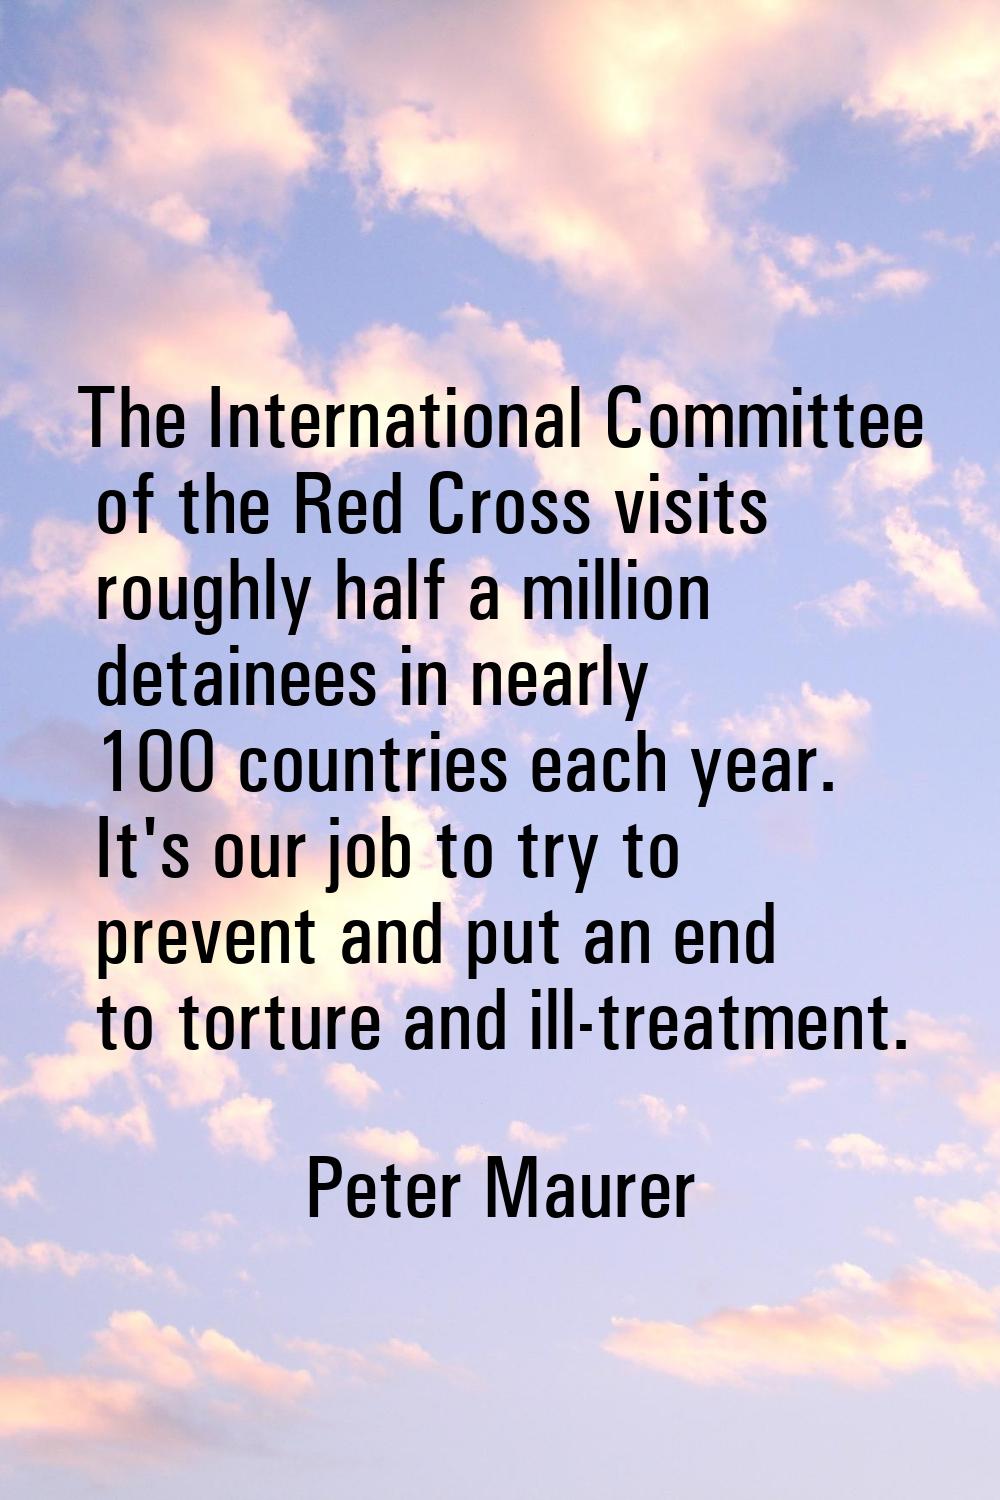 The International Committee of the Red Cross visits roughly half a million detainees in nearly 100 